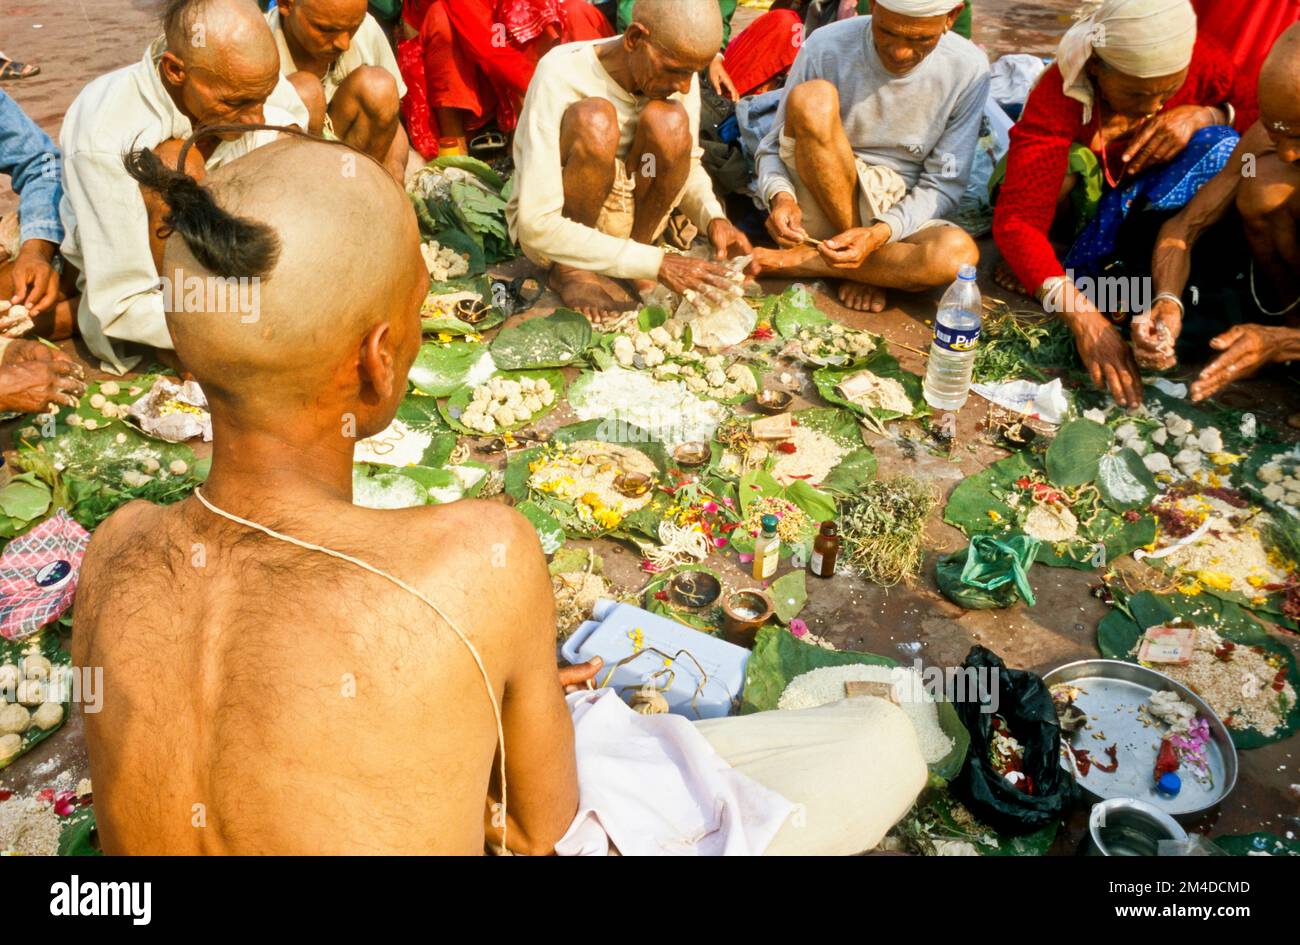 A priest is supporting praying ritual for the good reinkarnation of a died person at Har-Ki-Pauri-Ghat in Haridwar Stock Photo